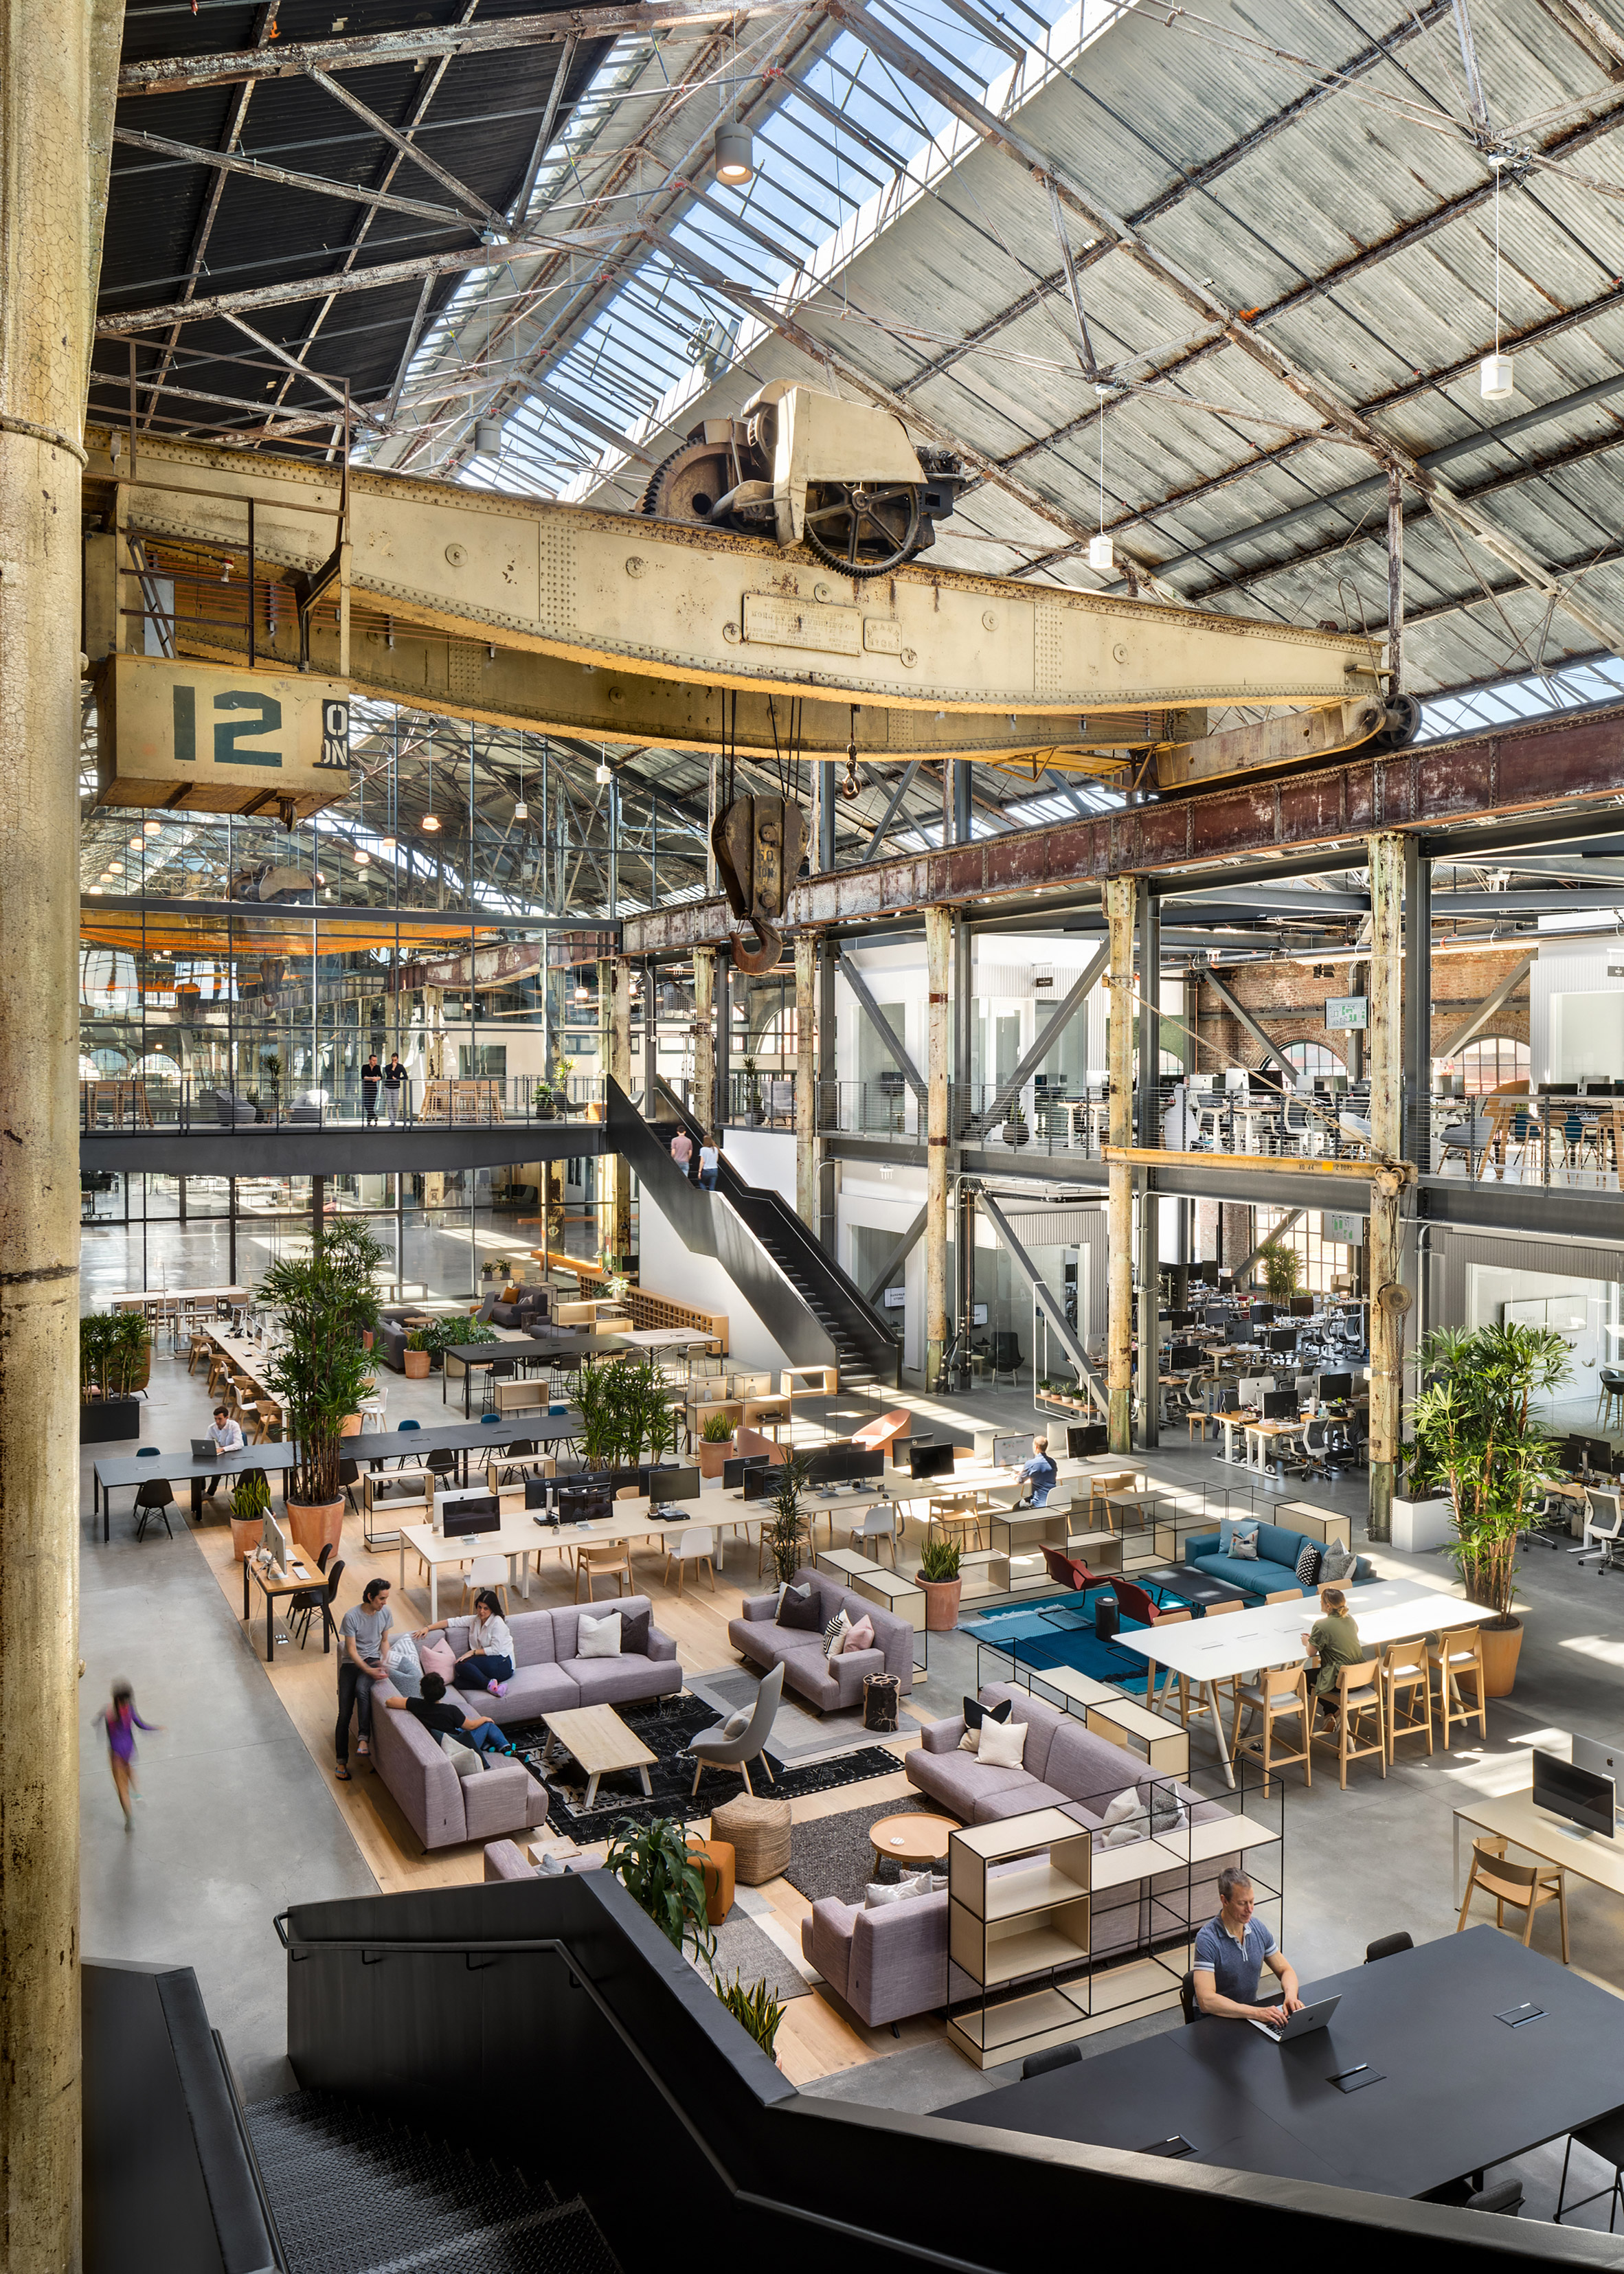 70 Francisco\'s Gusto San headquarters Vast Pier becomes at warehouse